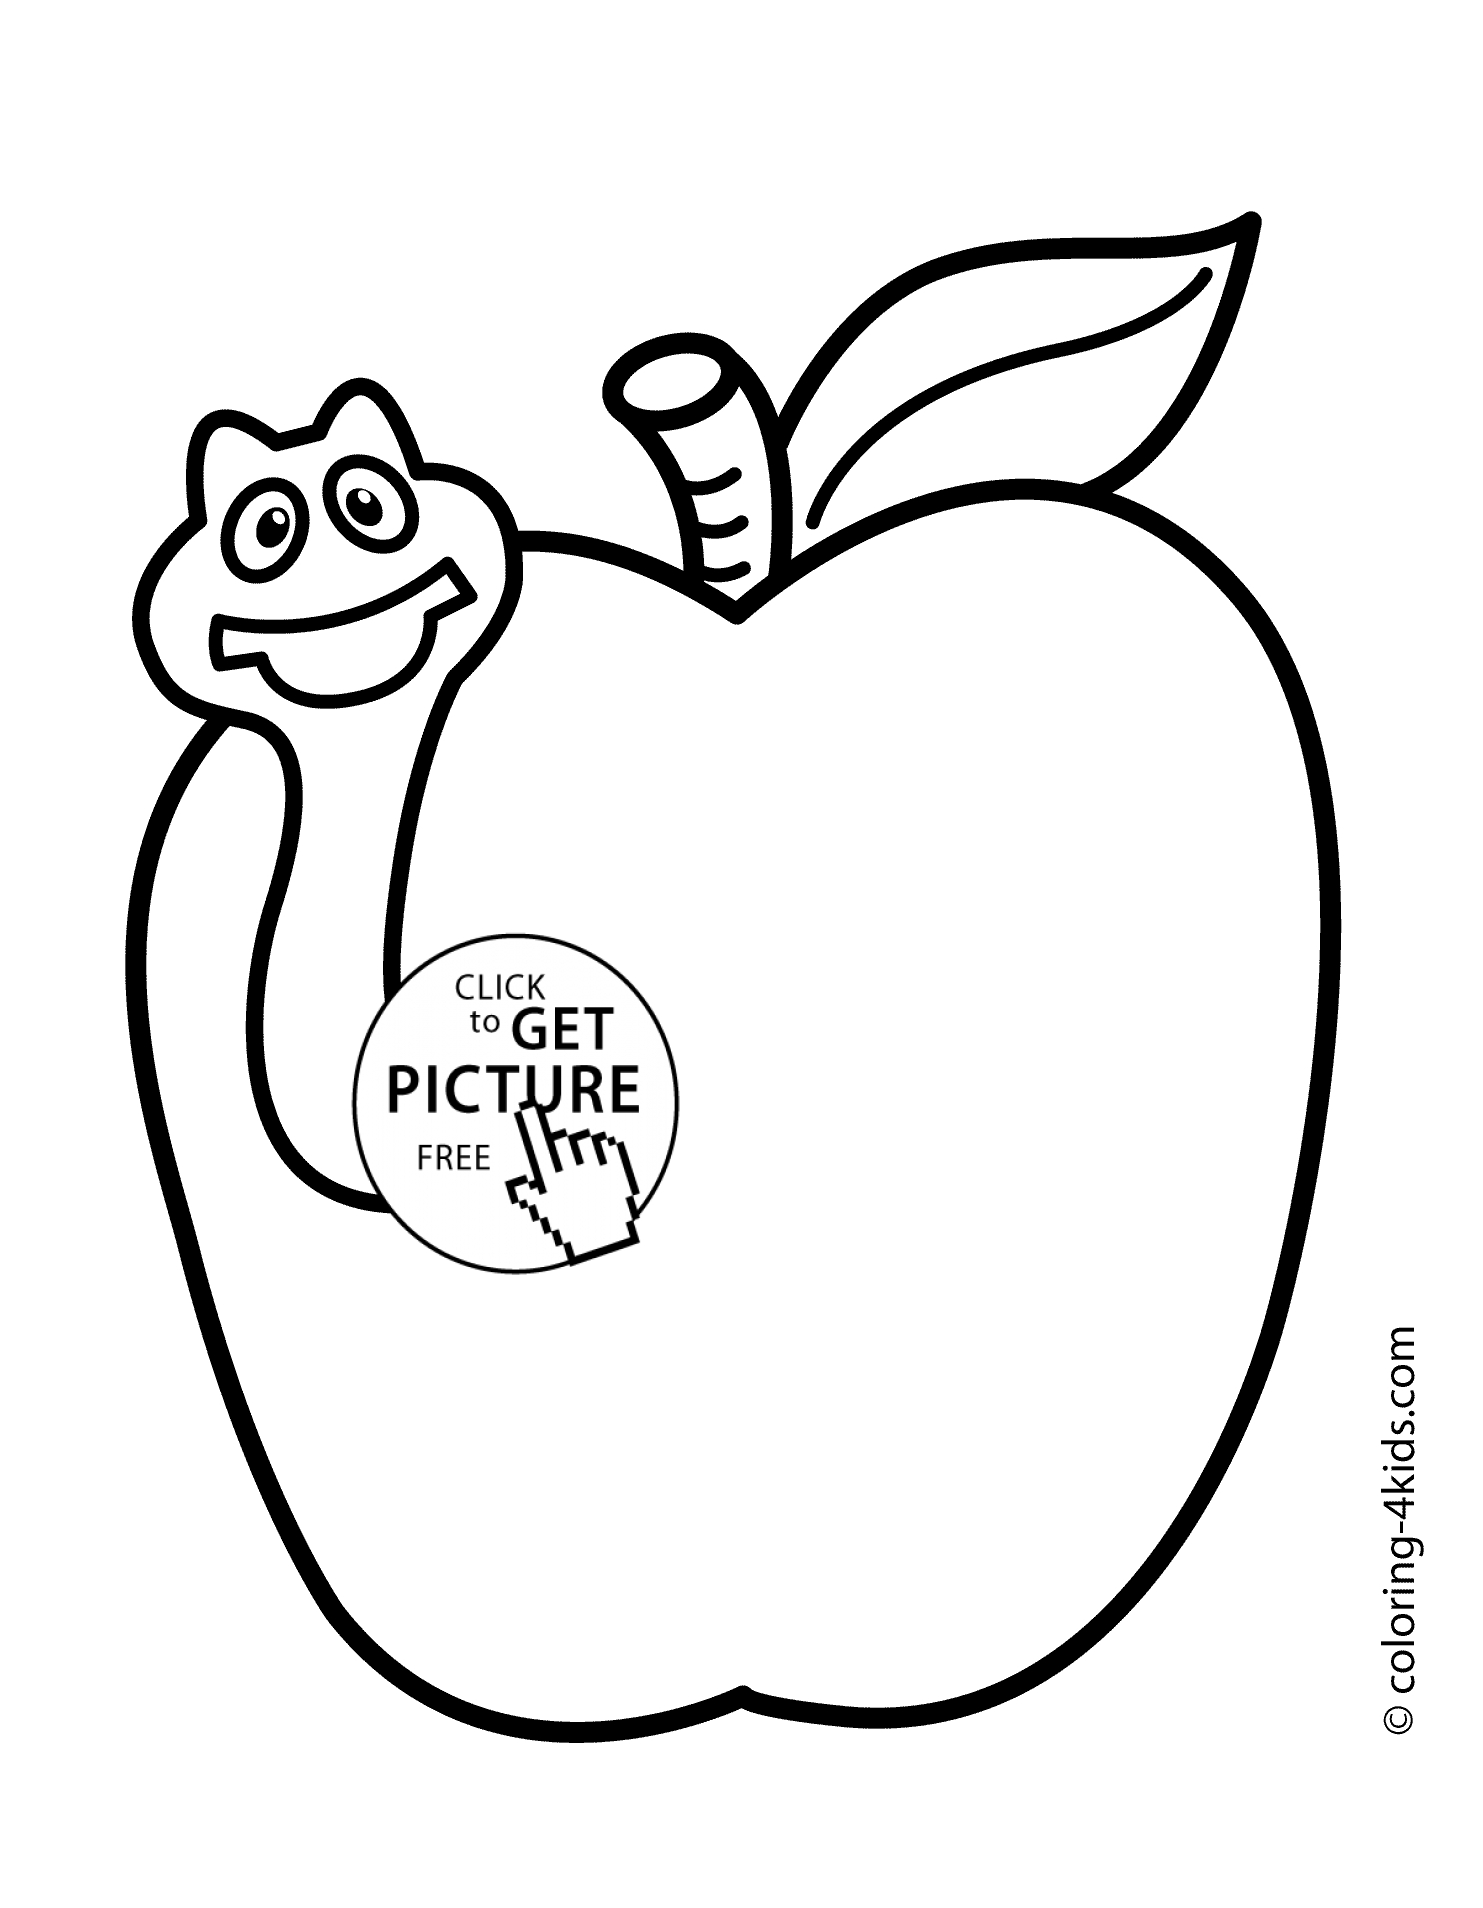 Printable Apple Coloring Pages Apple With Worm Fruits Coloring Pages Simple For Kids Printable Free